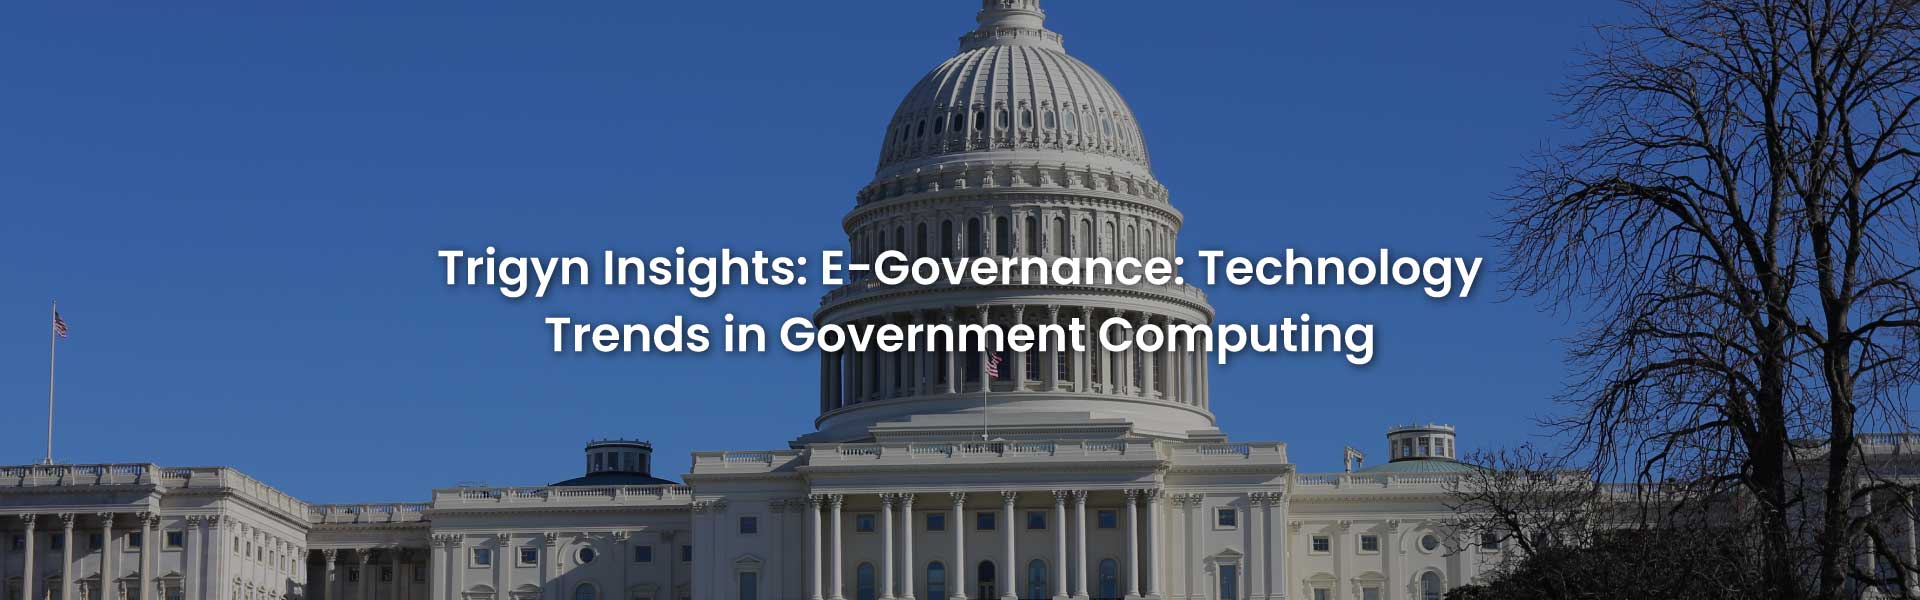 Technology Trends in Government Computing